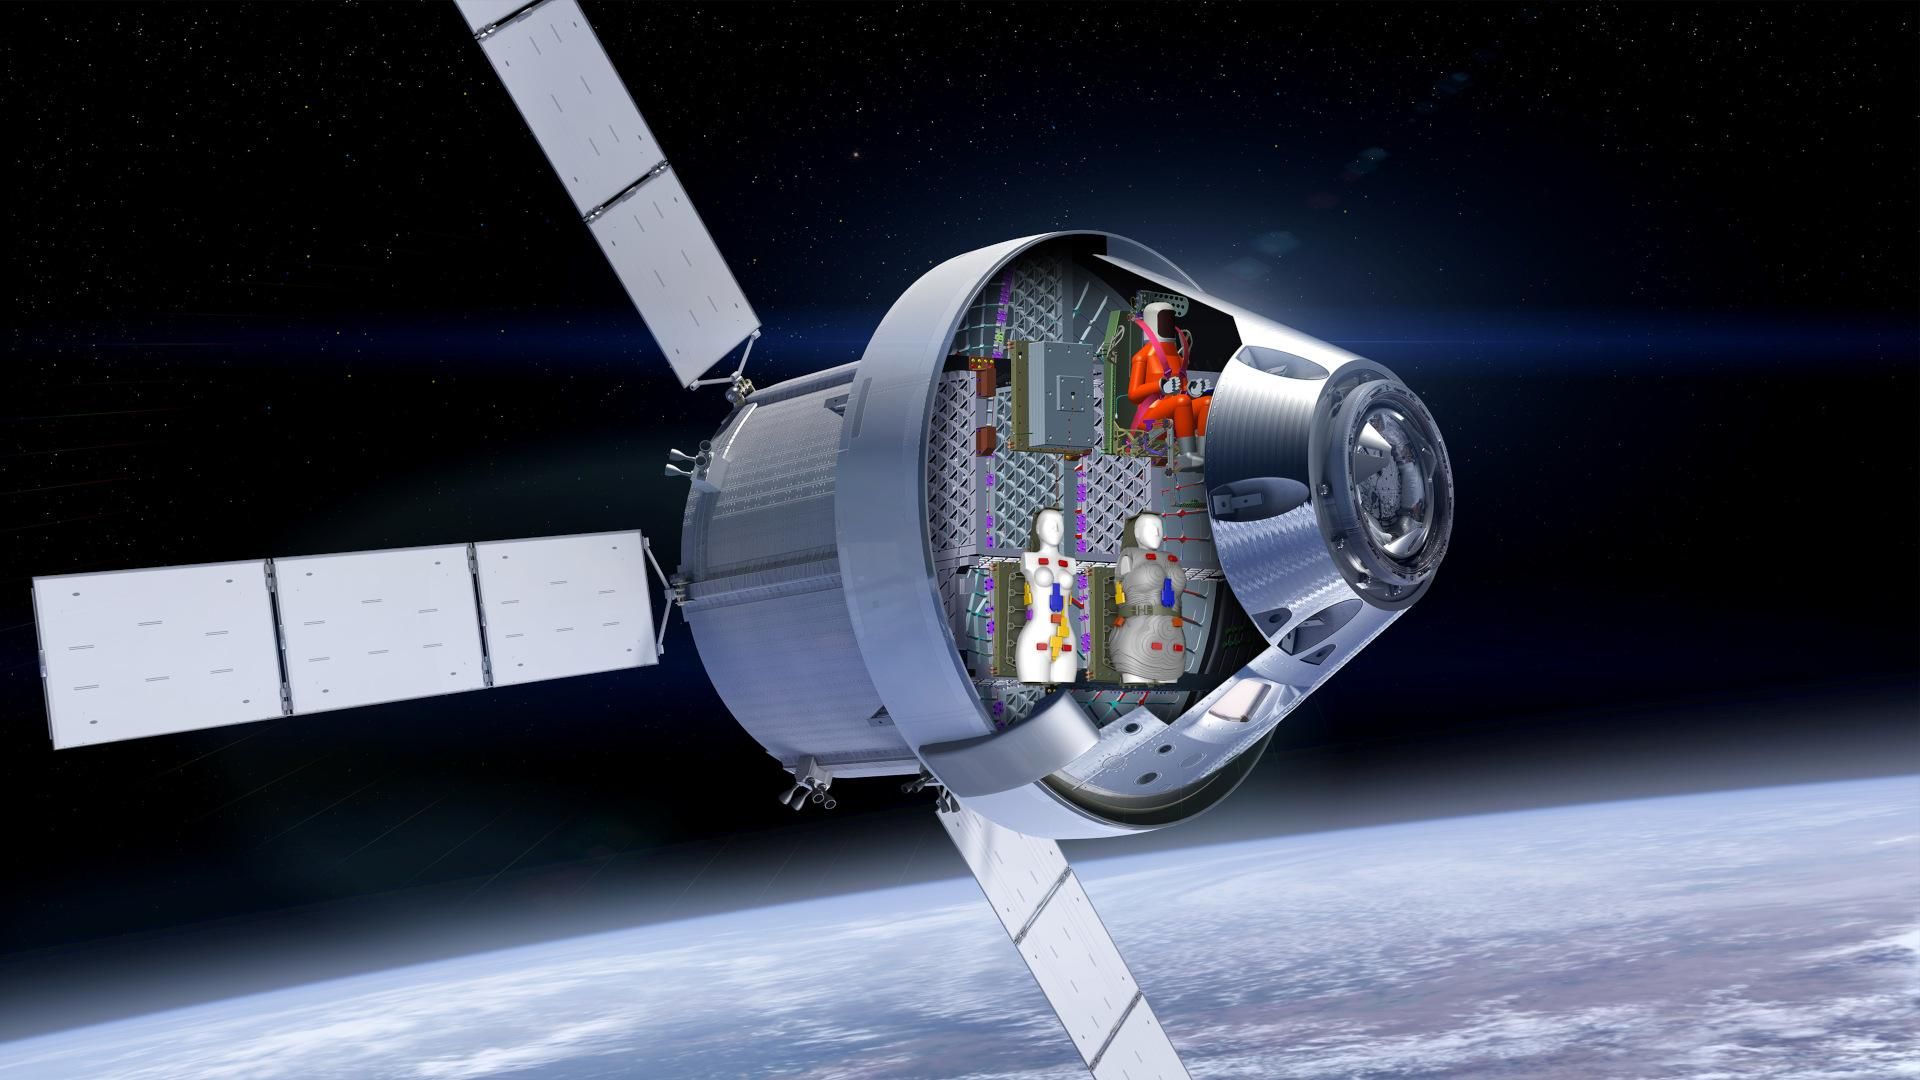 Illustration of the Artemis I space mission with female mannequins inside.